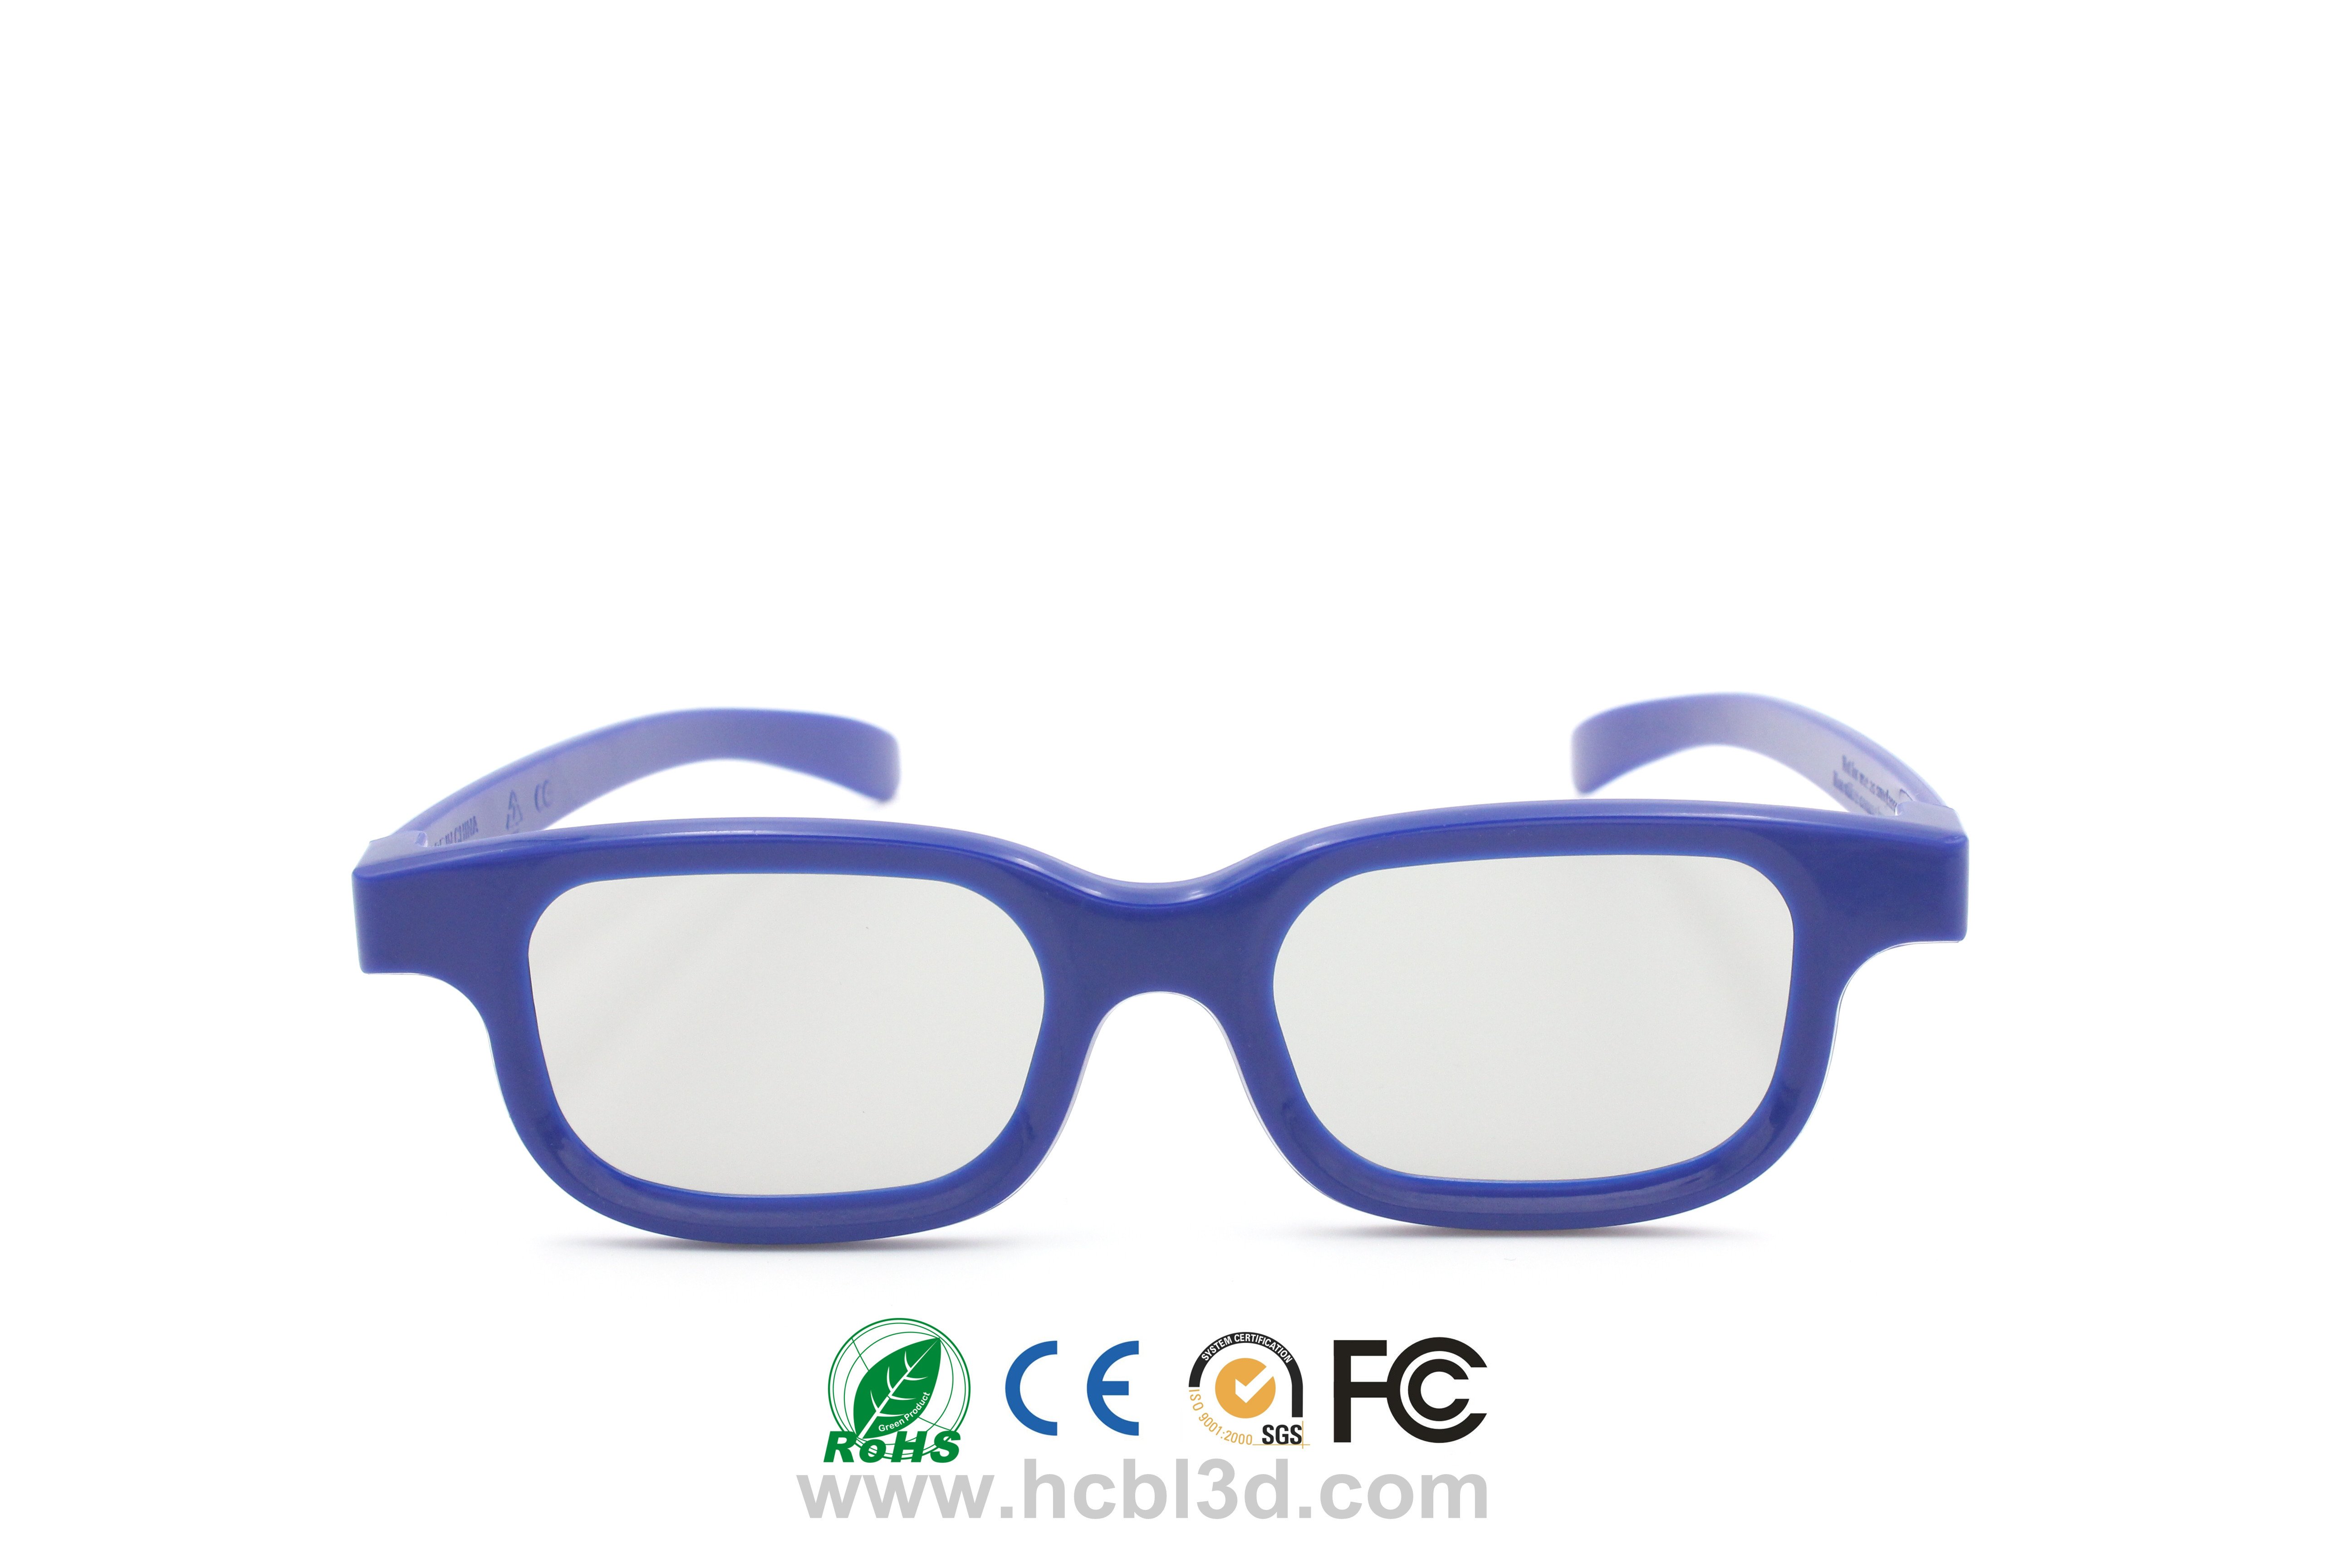 Universal Passive Cinema 3D Glasses With High Quality Polarized Lens for best 3D experience